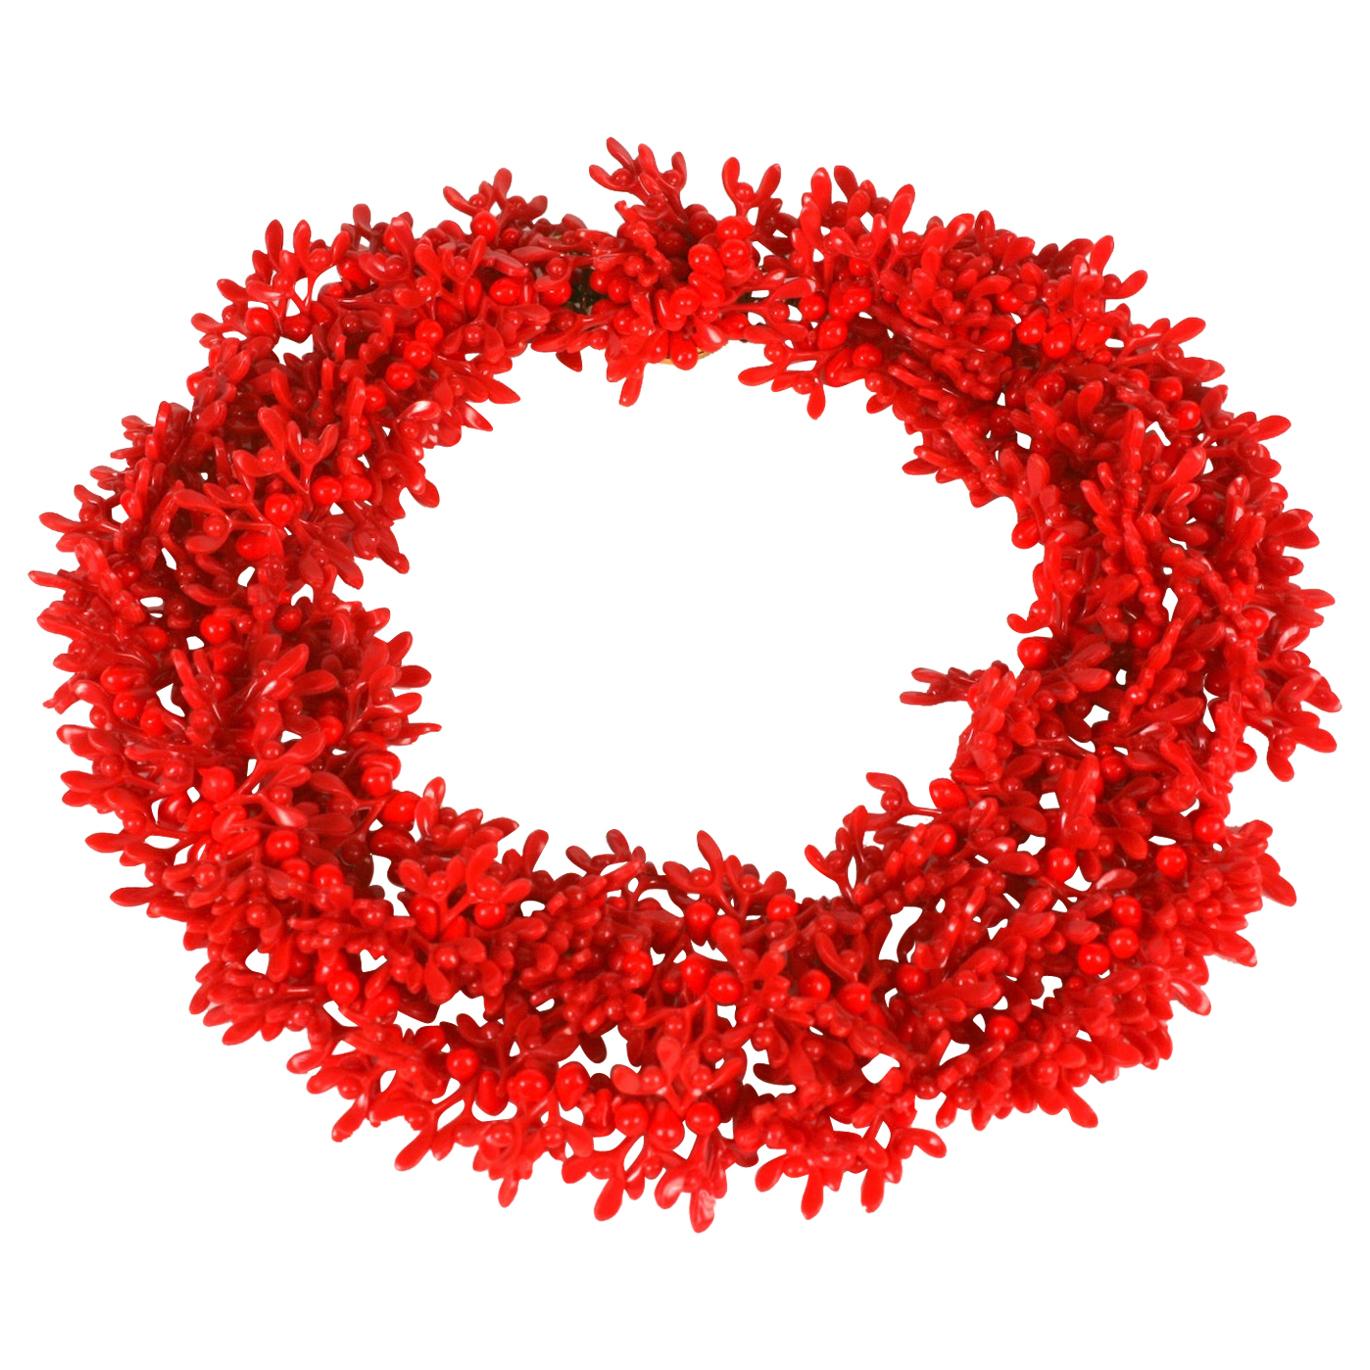 Christian Dior Red Coral Mistletoe Necklace